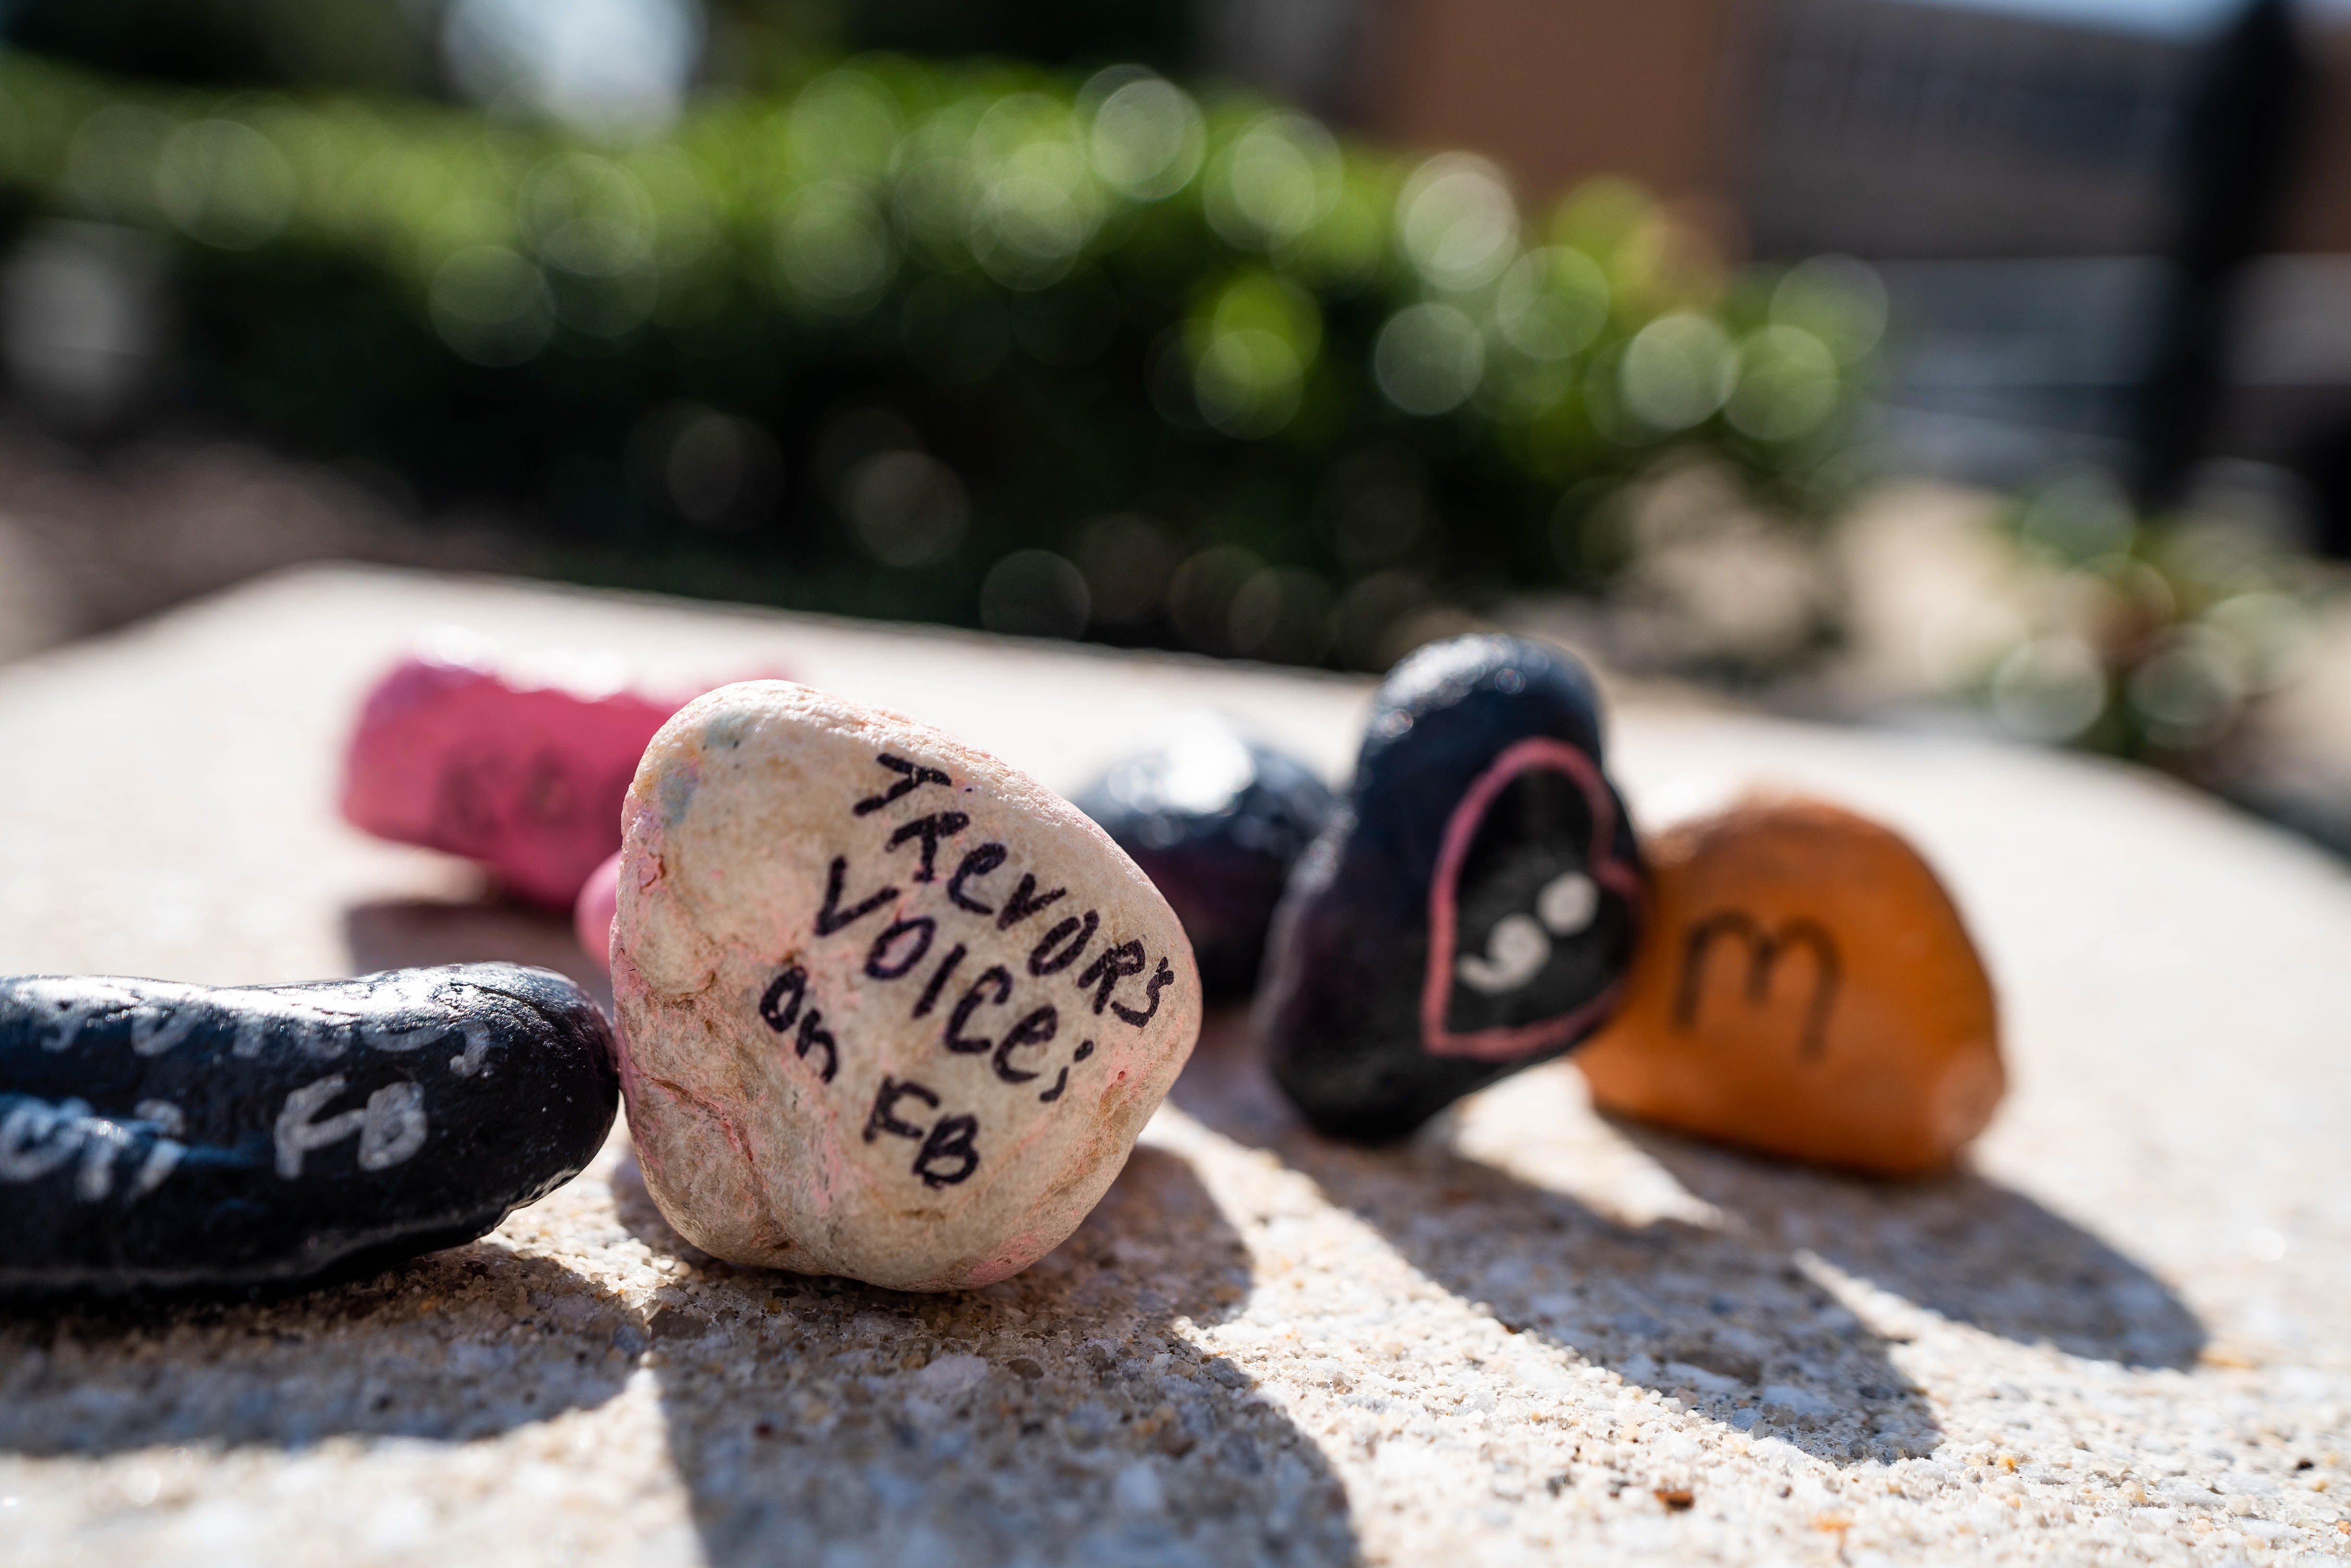 Painted stones with suicide-prevention messages